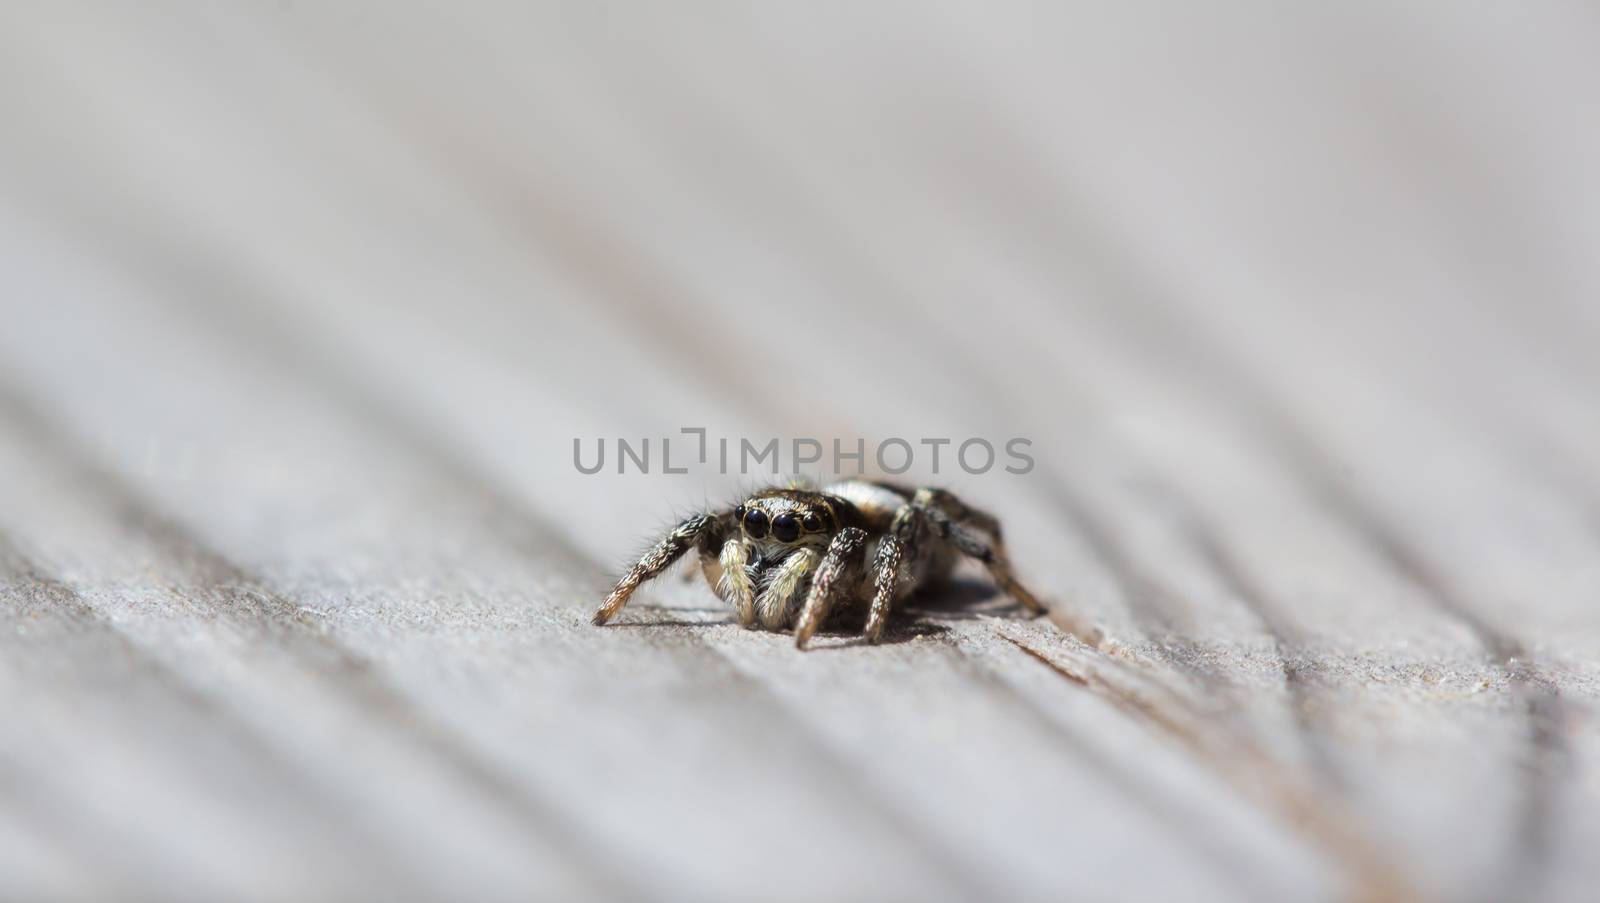 Little jumping spider is sitting on wood with soft background by sandra_fotodesign